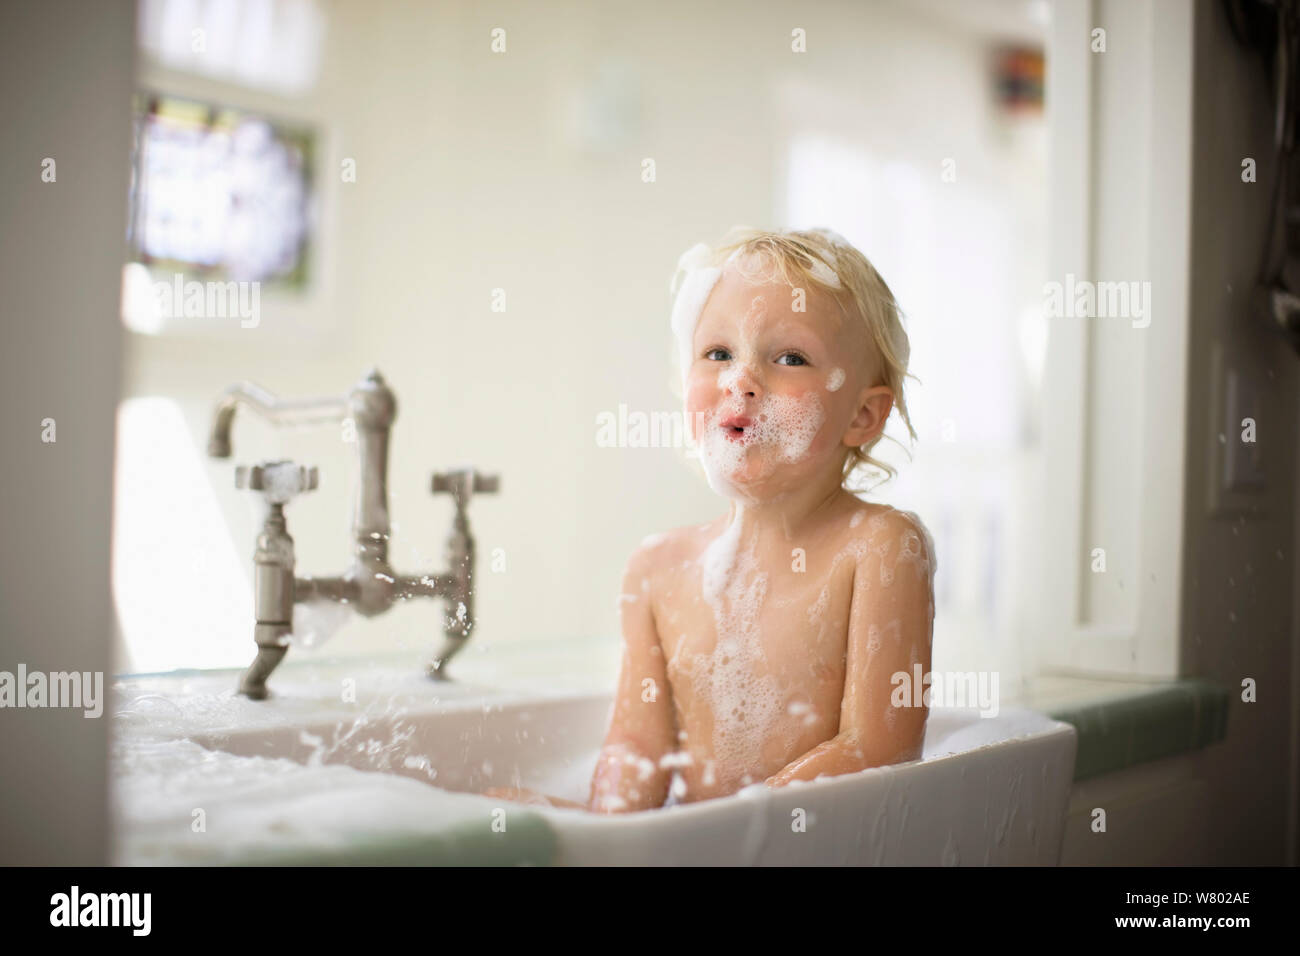 Portrait of a toddler having fun while taking a bubble bath. Stock Photo